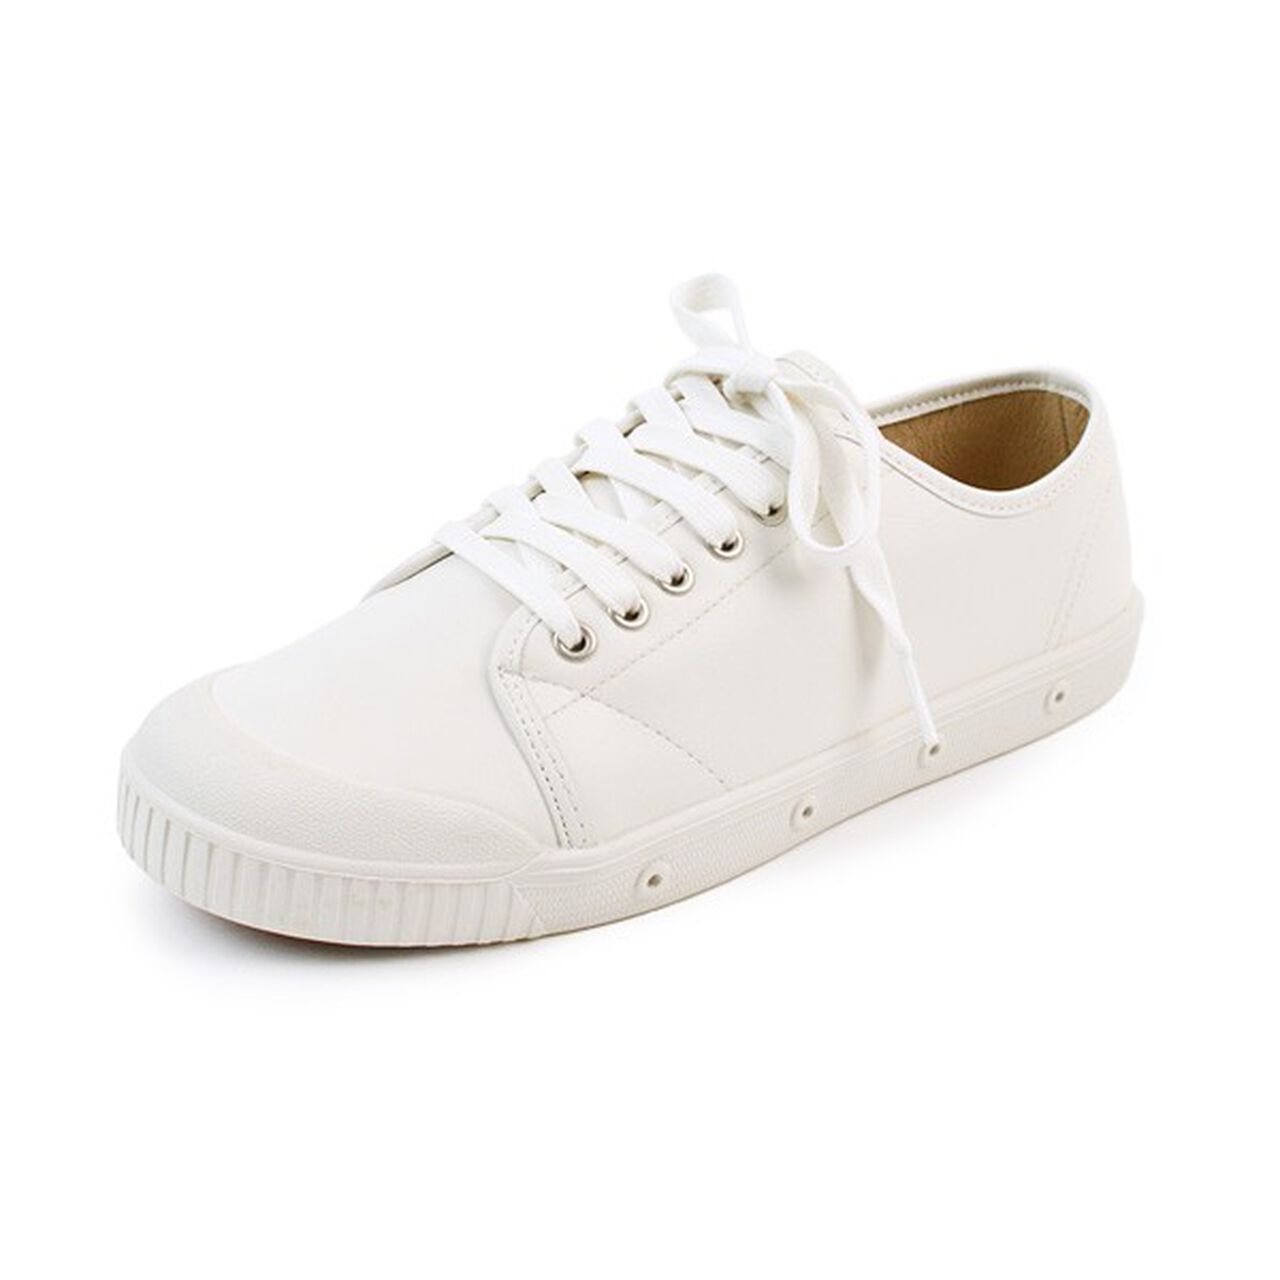 G2 low-cut leather trainers,White, large image number 0